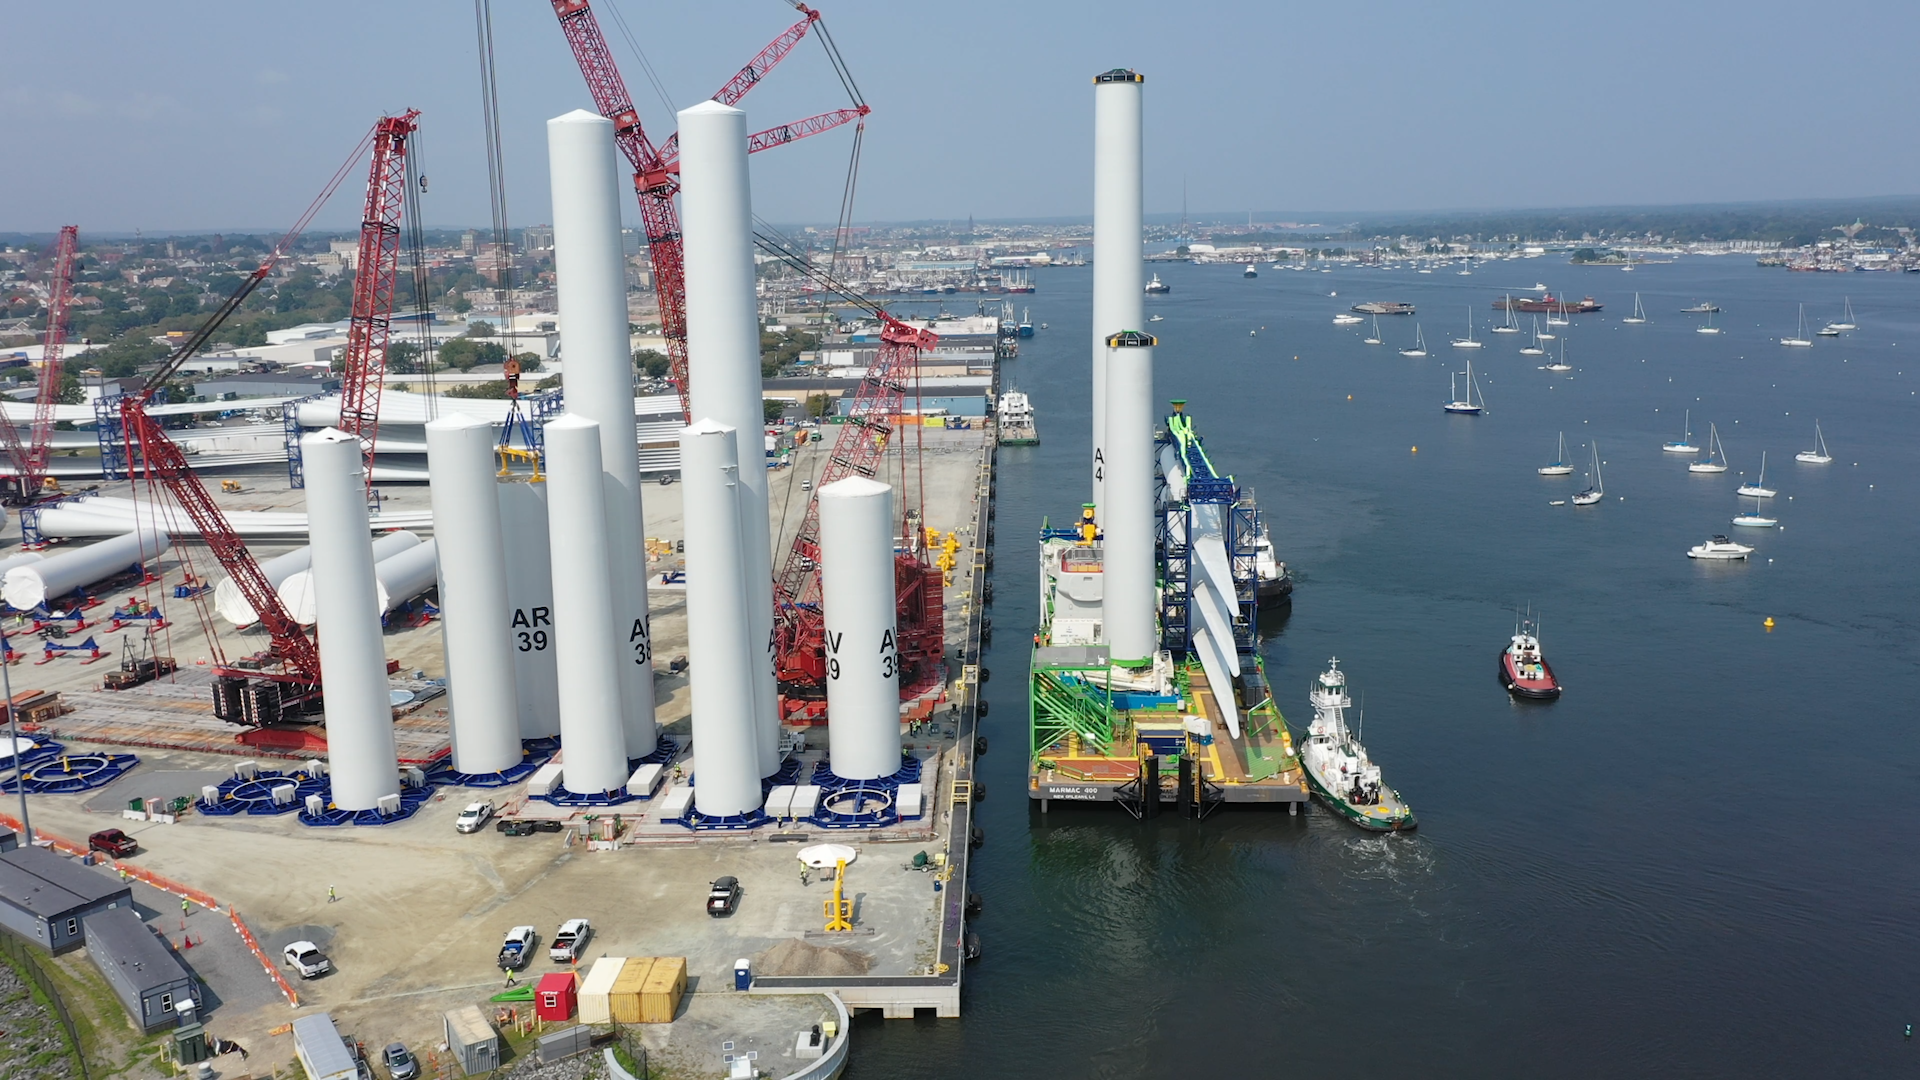 Wind turbine towers standing vertically at New Bedford Marine Commerce Terminal and being moved with tall red cranes